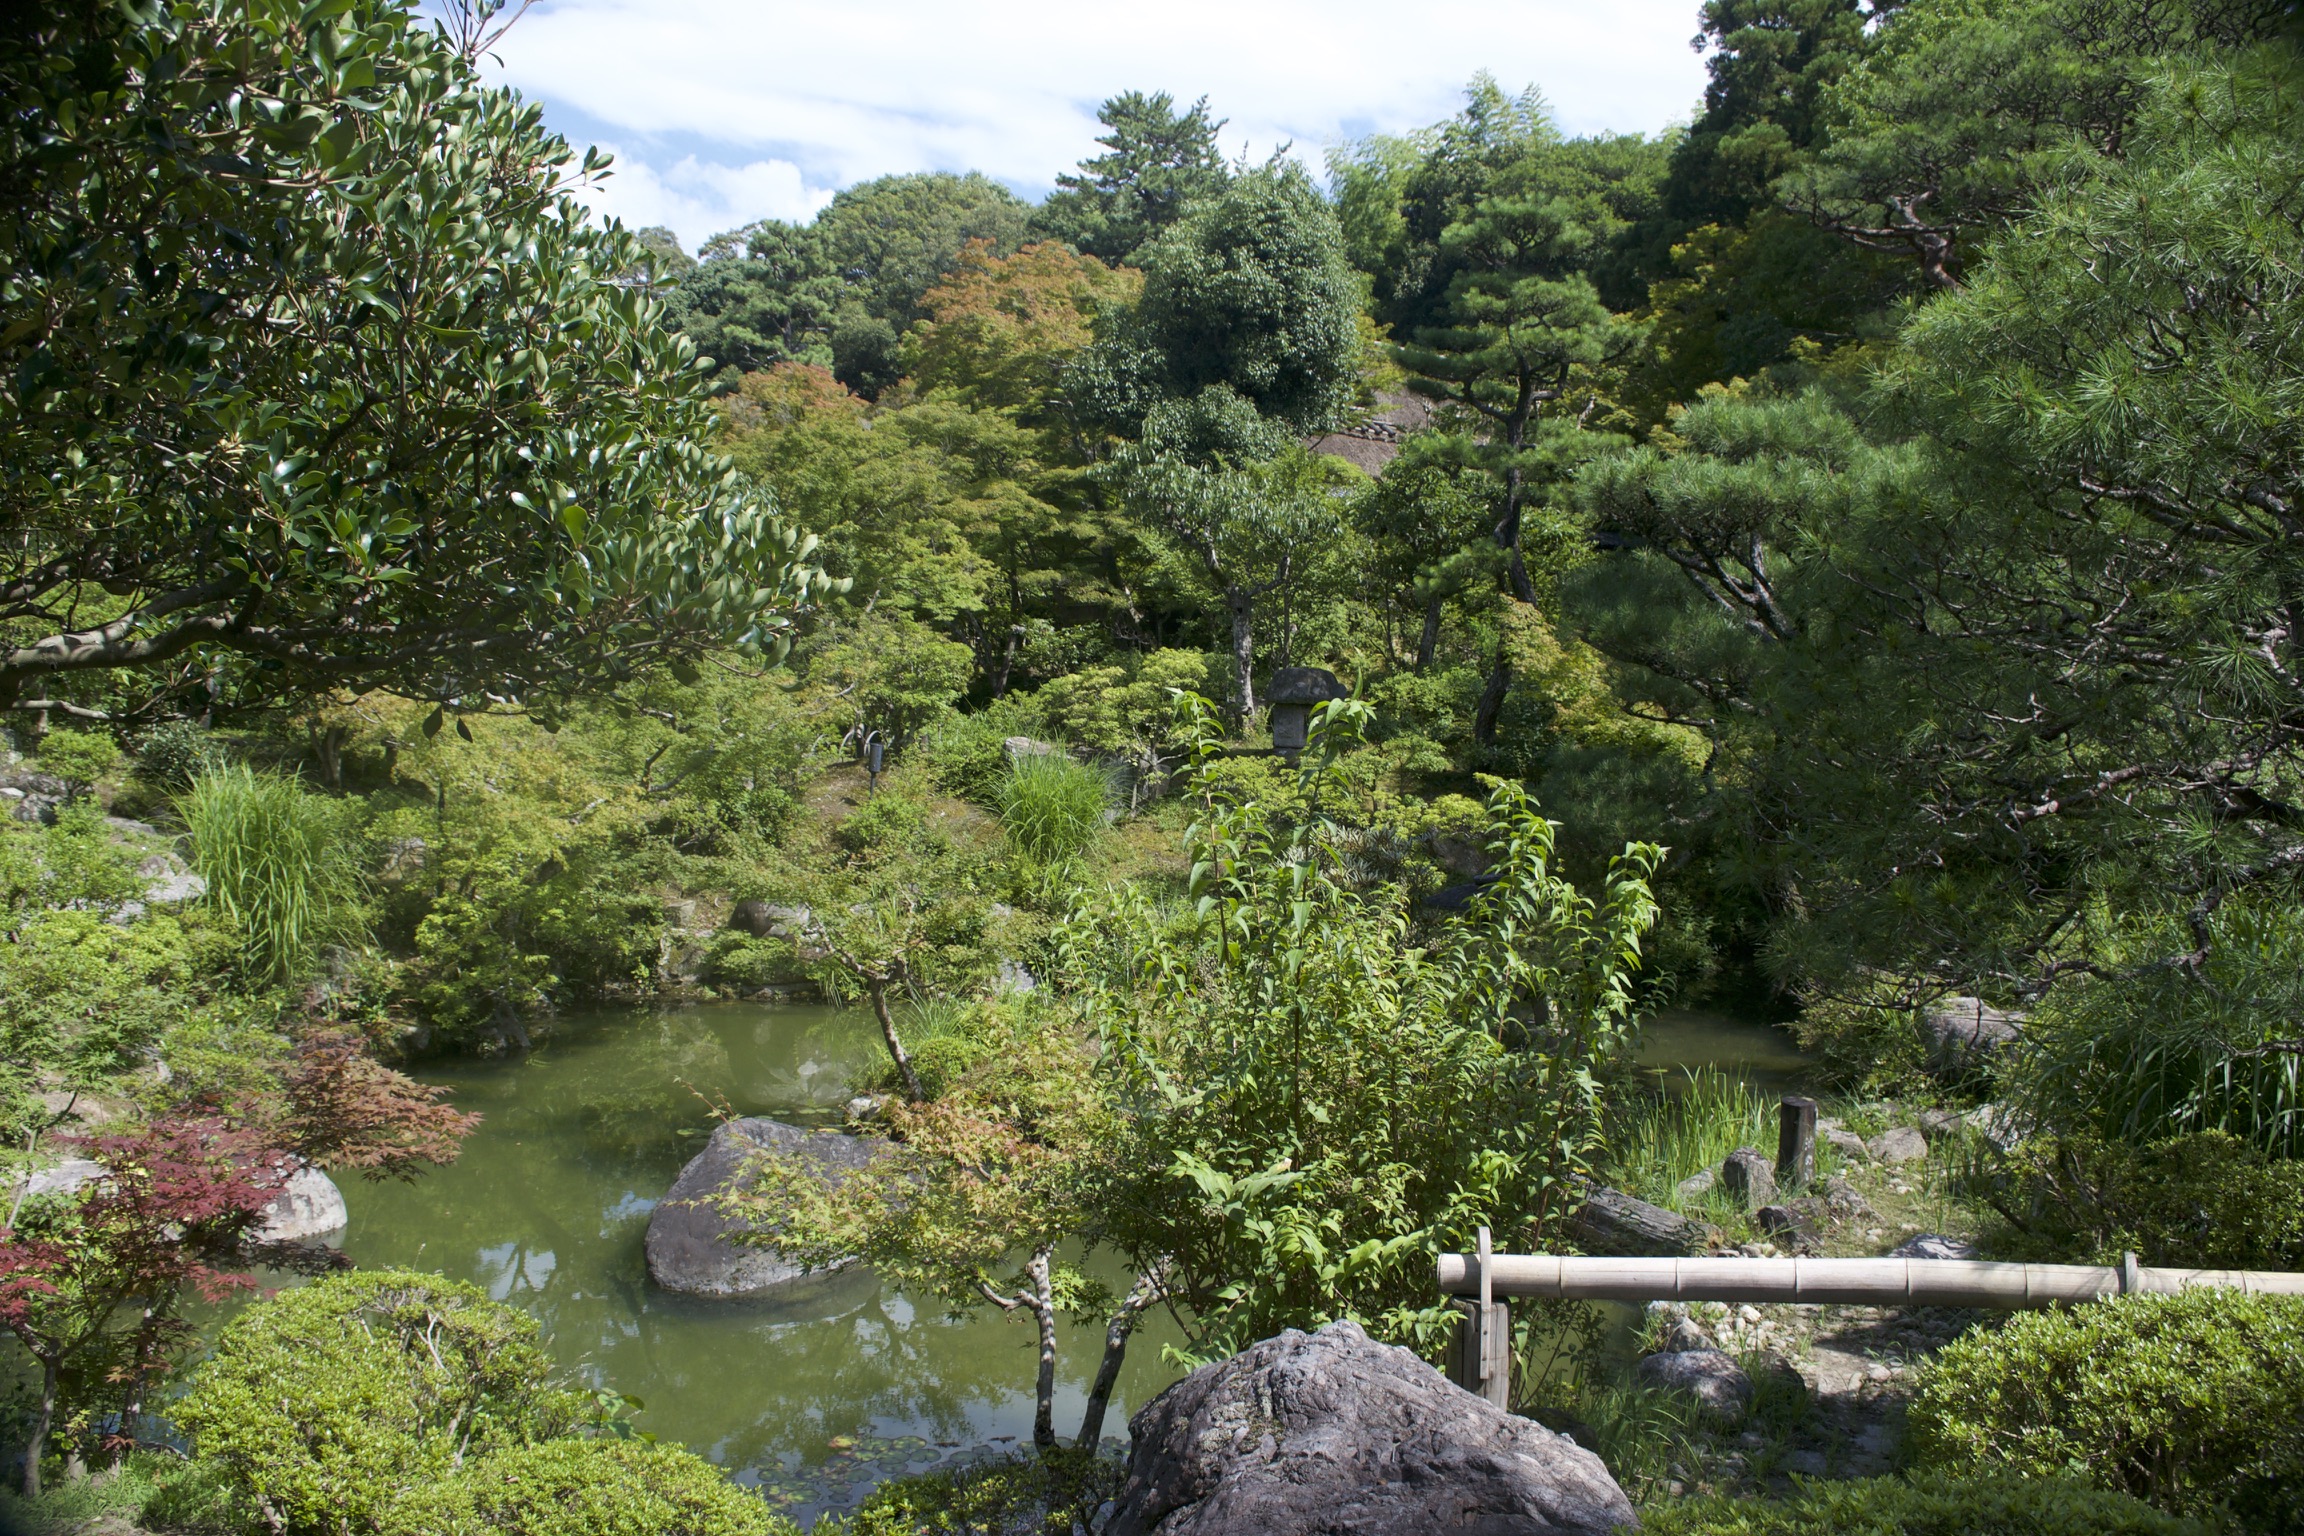 A small pond sits surrounded on all sides by lush greenery.